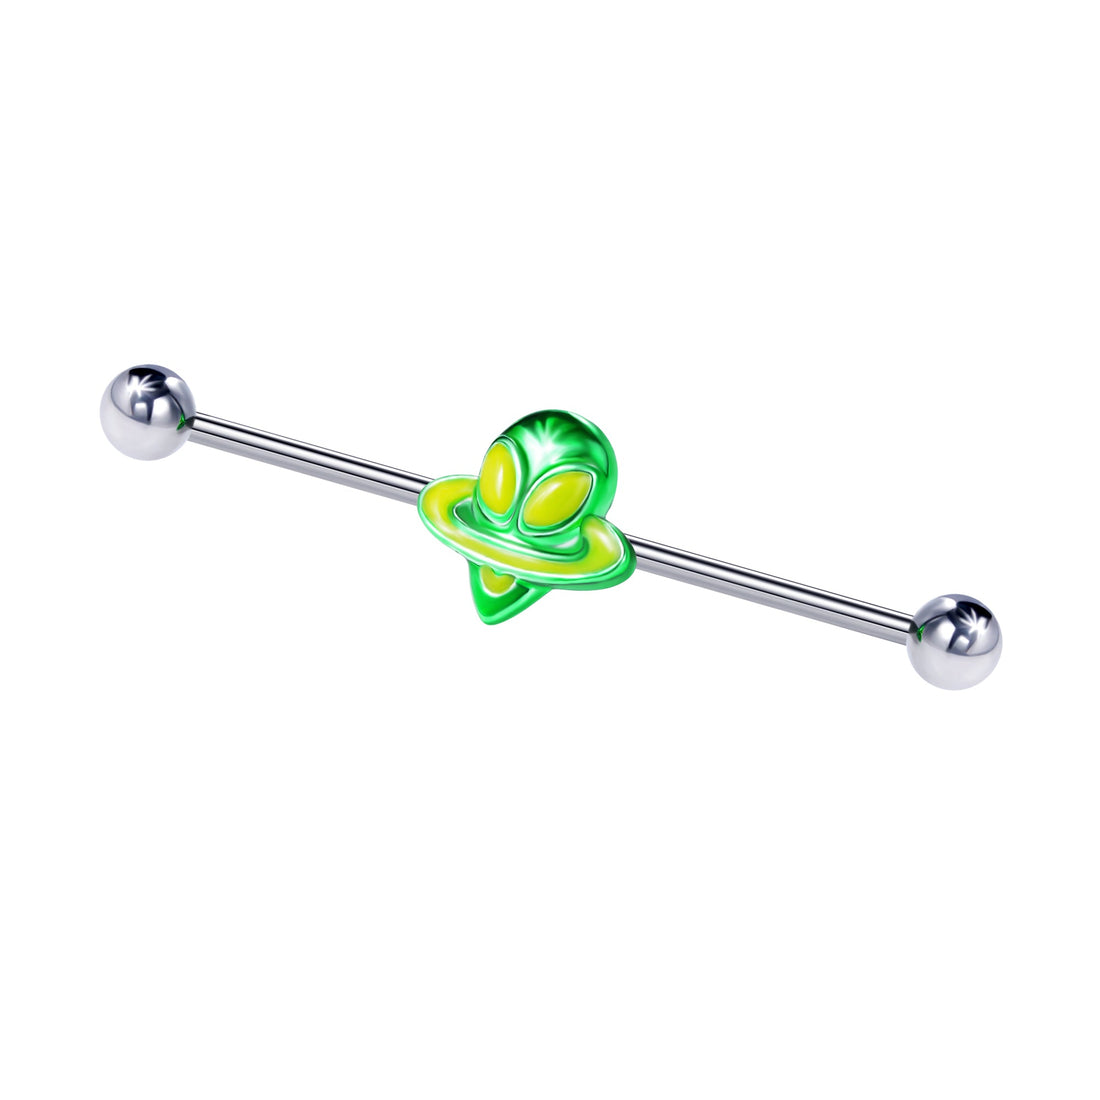 Space Alien Industrial Barbell Piercing - Dr. Piercing Aftercare